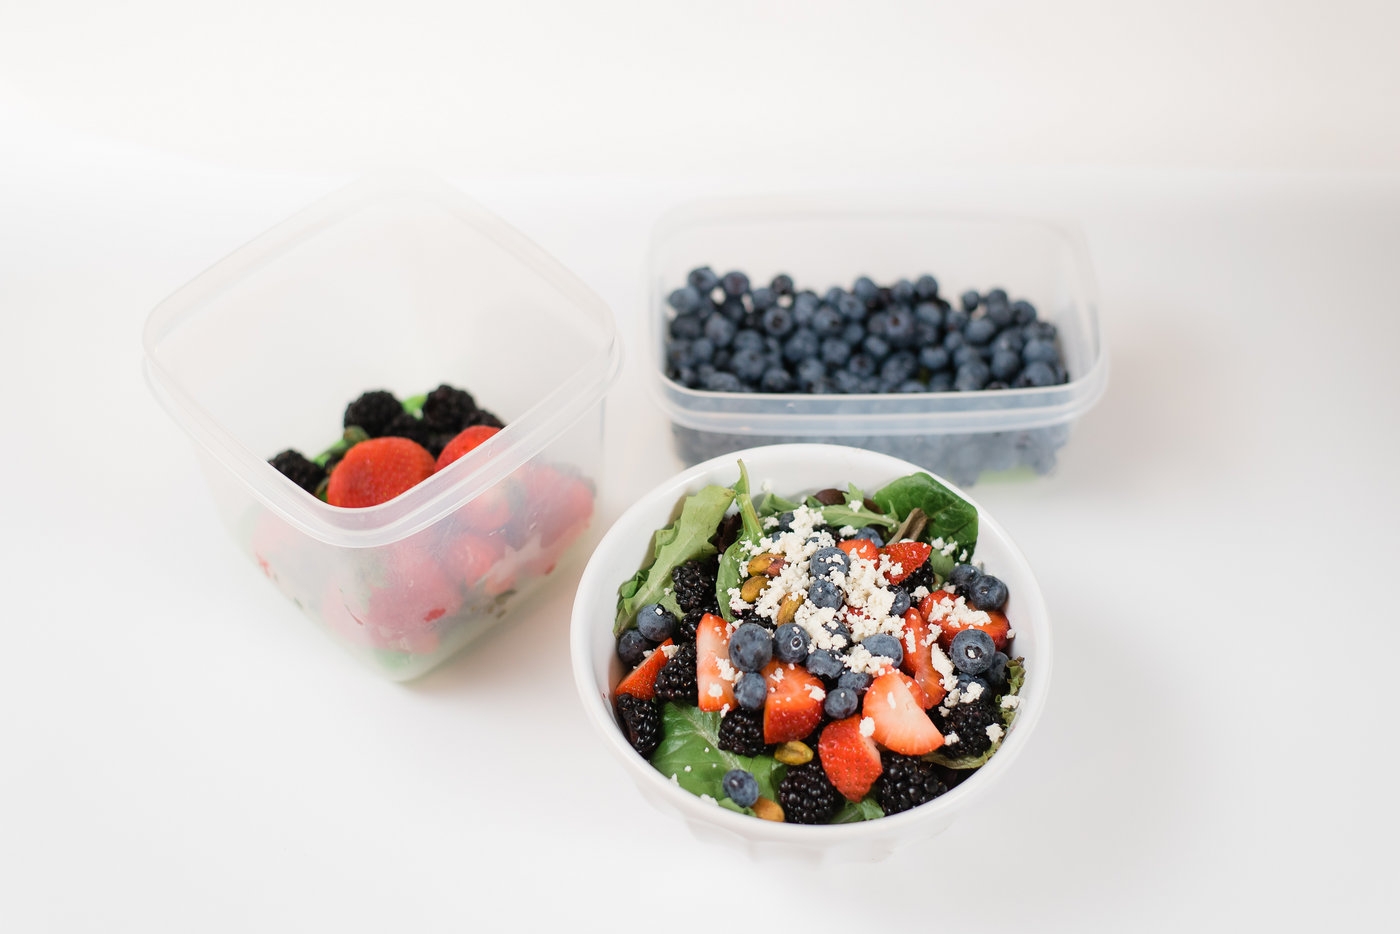 Healthy Berry Salad Recipe by Alabama Health + Food blogger, Heather Brown // My Life Well Loved